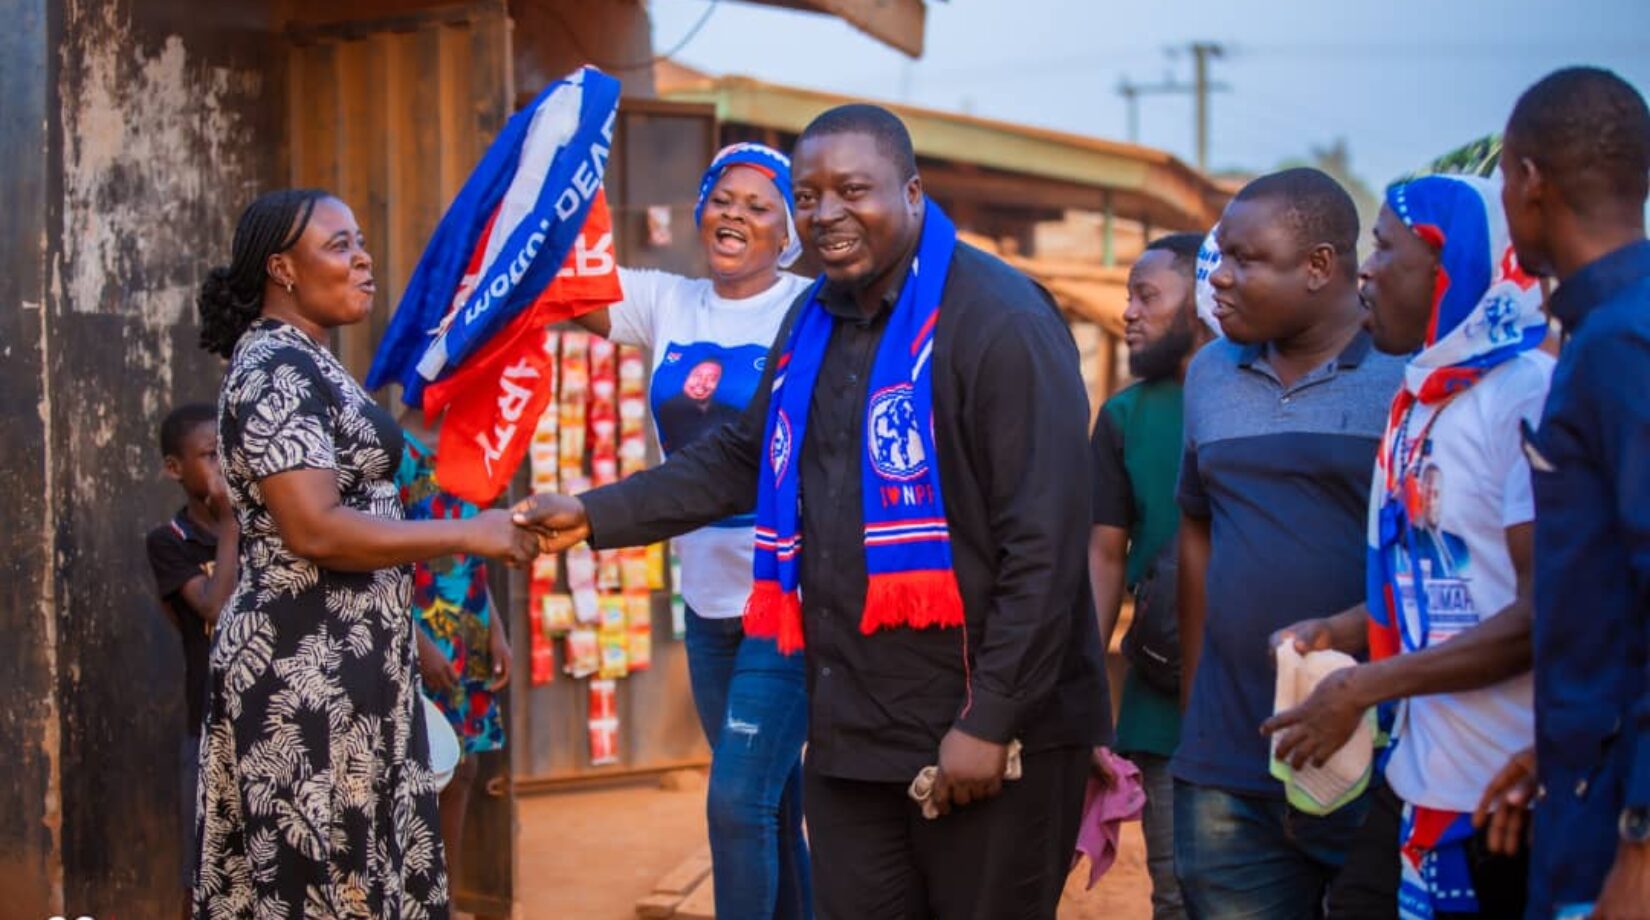 Ejisu By-election:NPP Intensifies Campaign with Outreach to Religious Institutions, Community Gatherings, and Intellectual Engagement